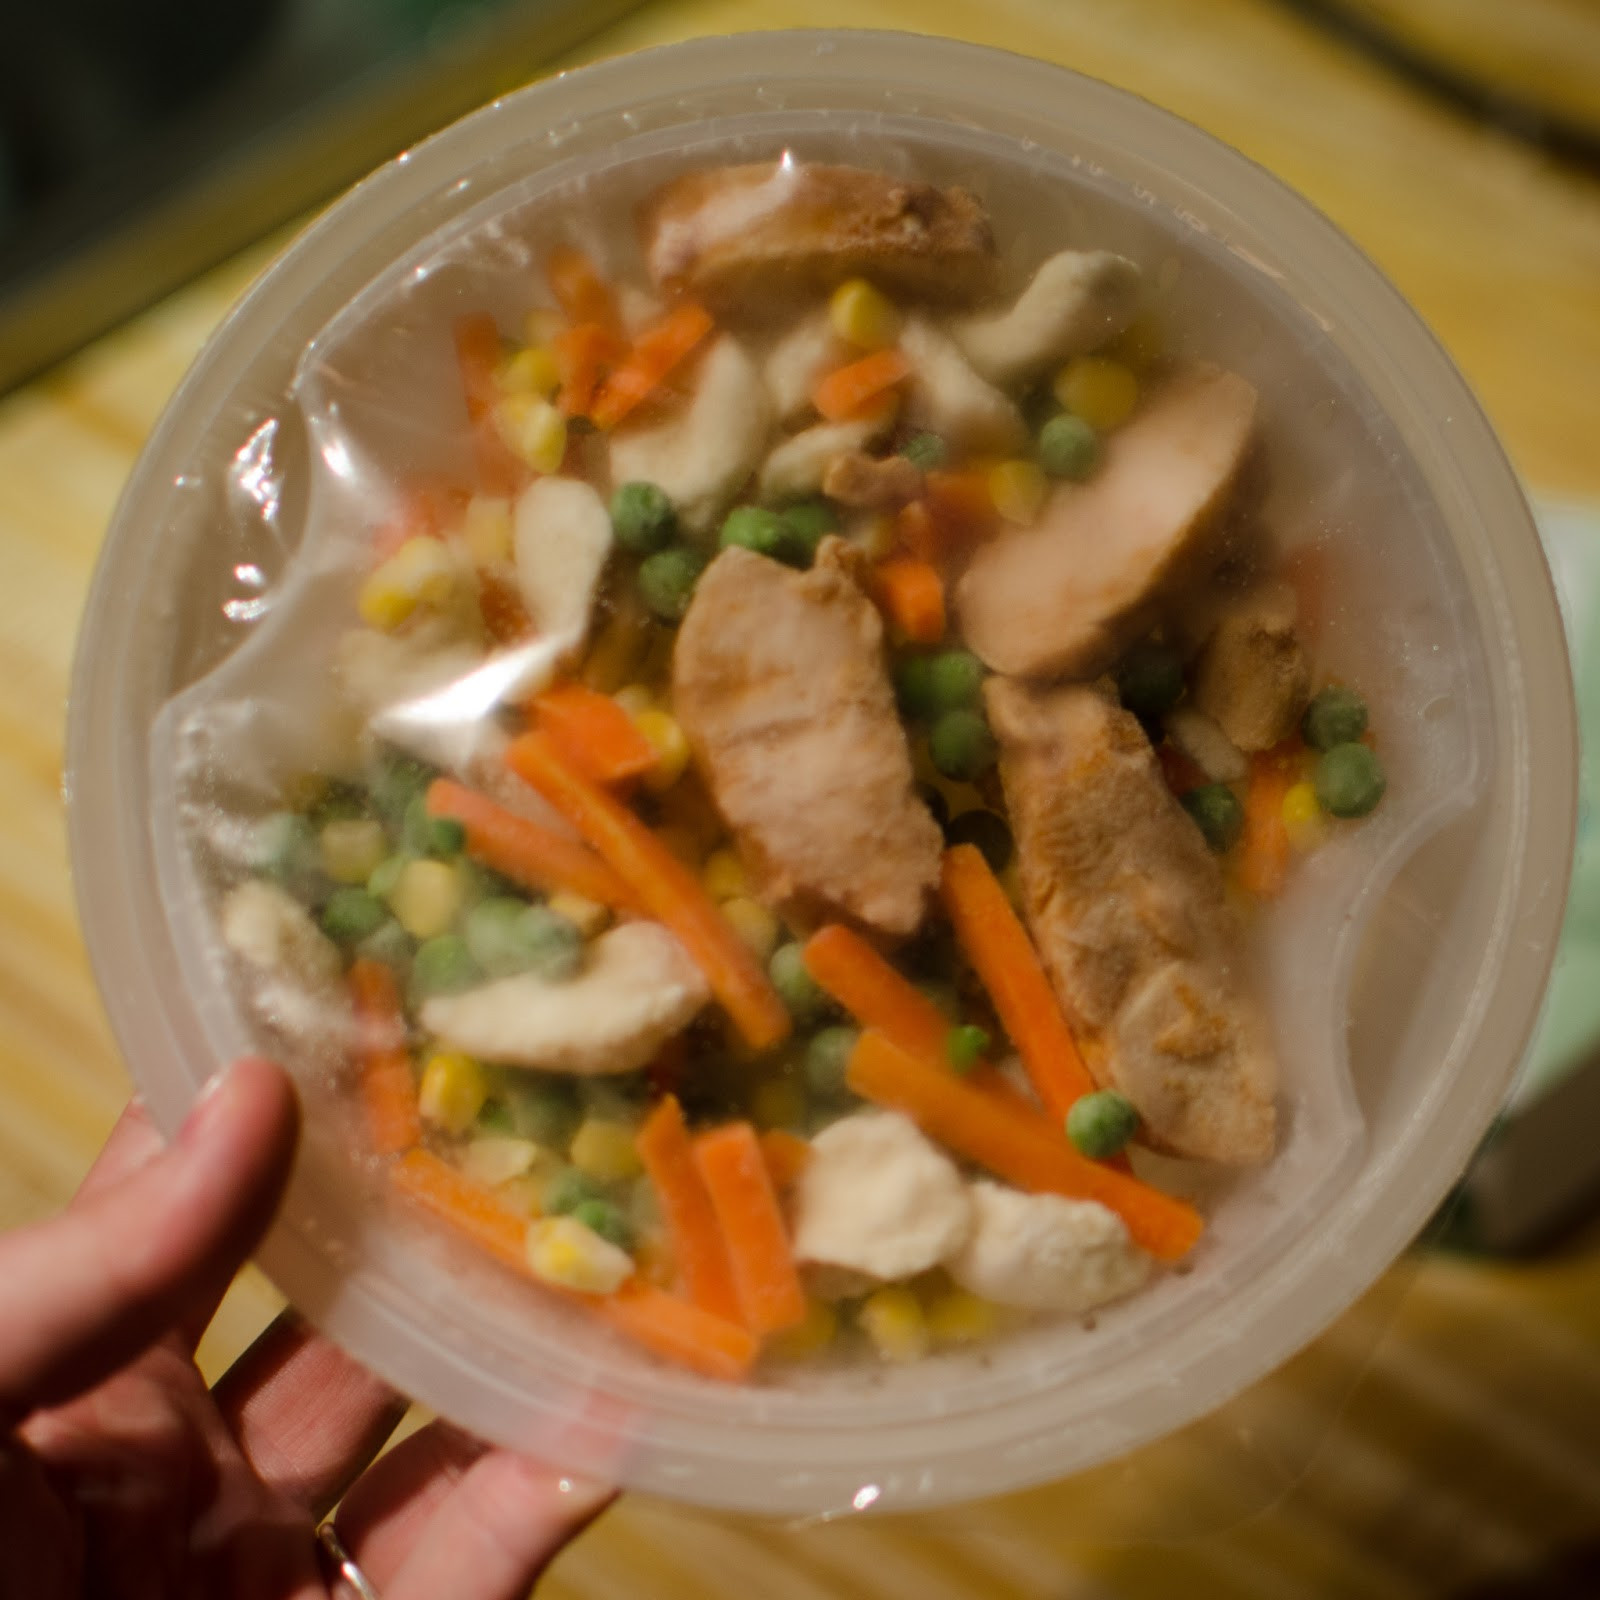 Healthy Choice Crustless Chicken Pot Pie 20 Of the Best Ideas for What S for Lunch Wednesdays Healthy Choice Crustless